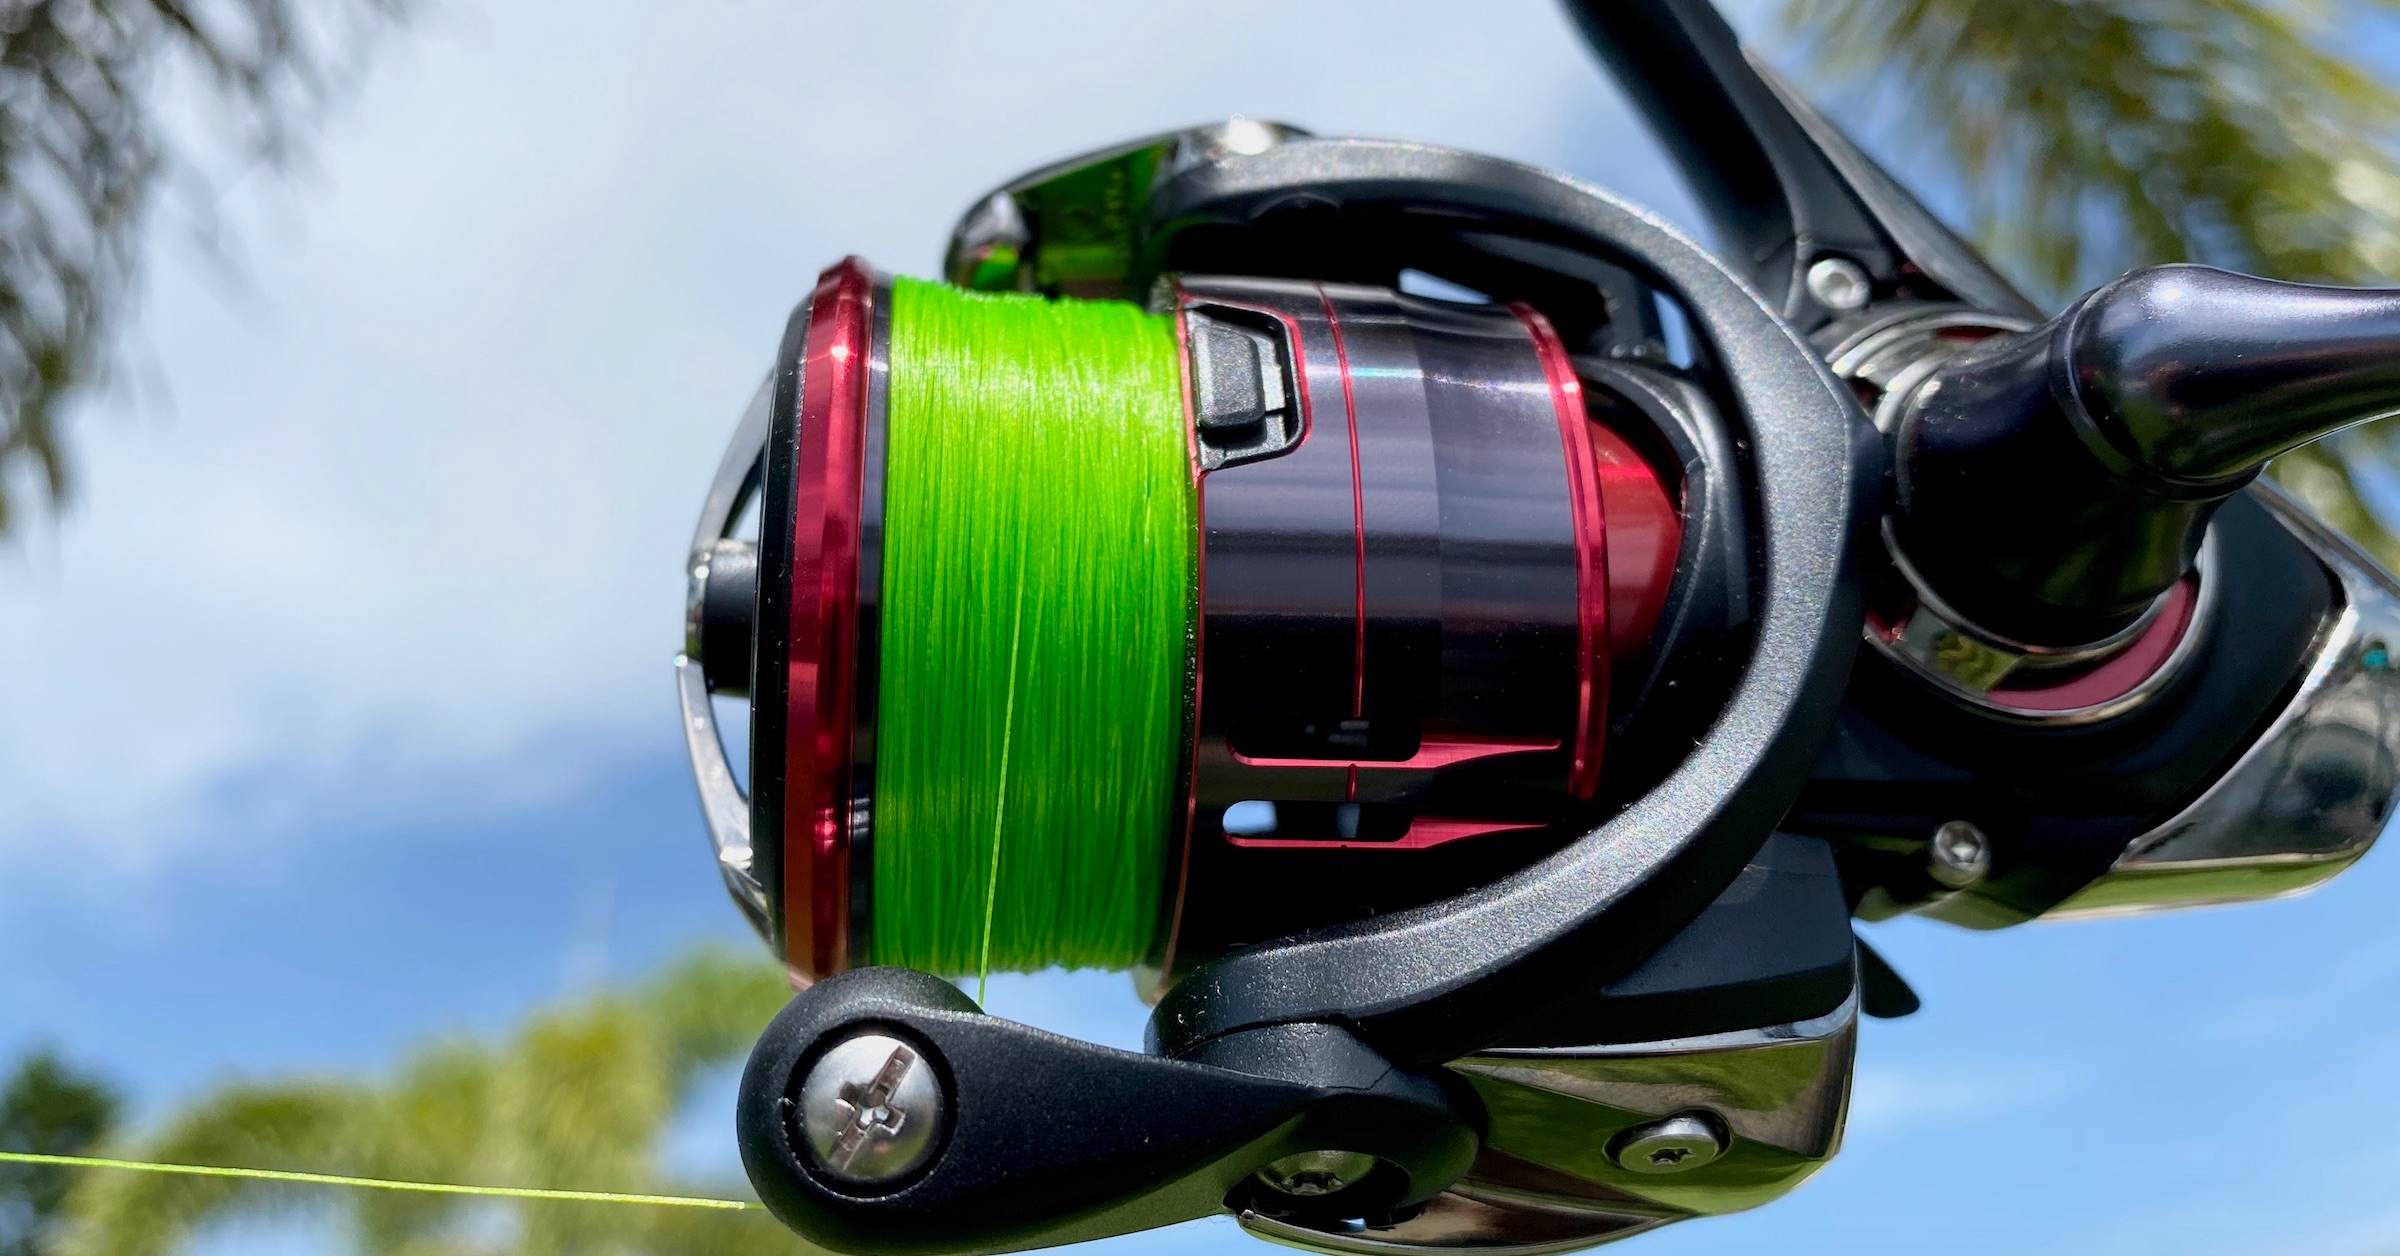 How To Spool A Spinning Reel With Braided Line (Save Money & Time)